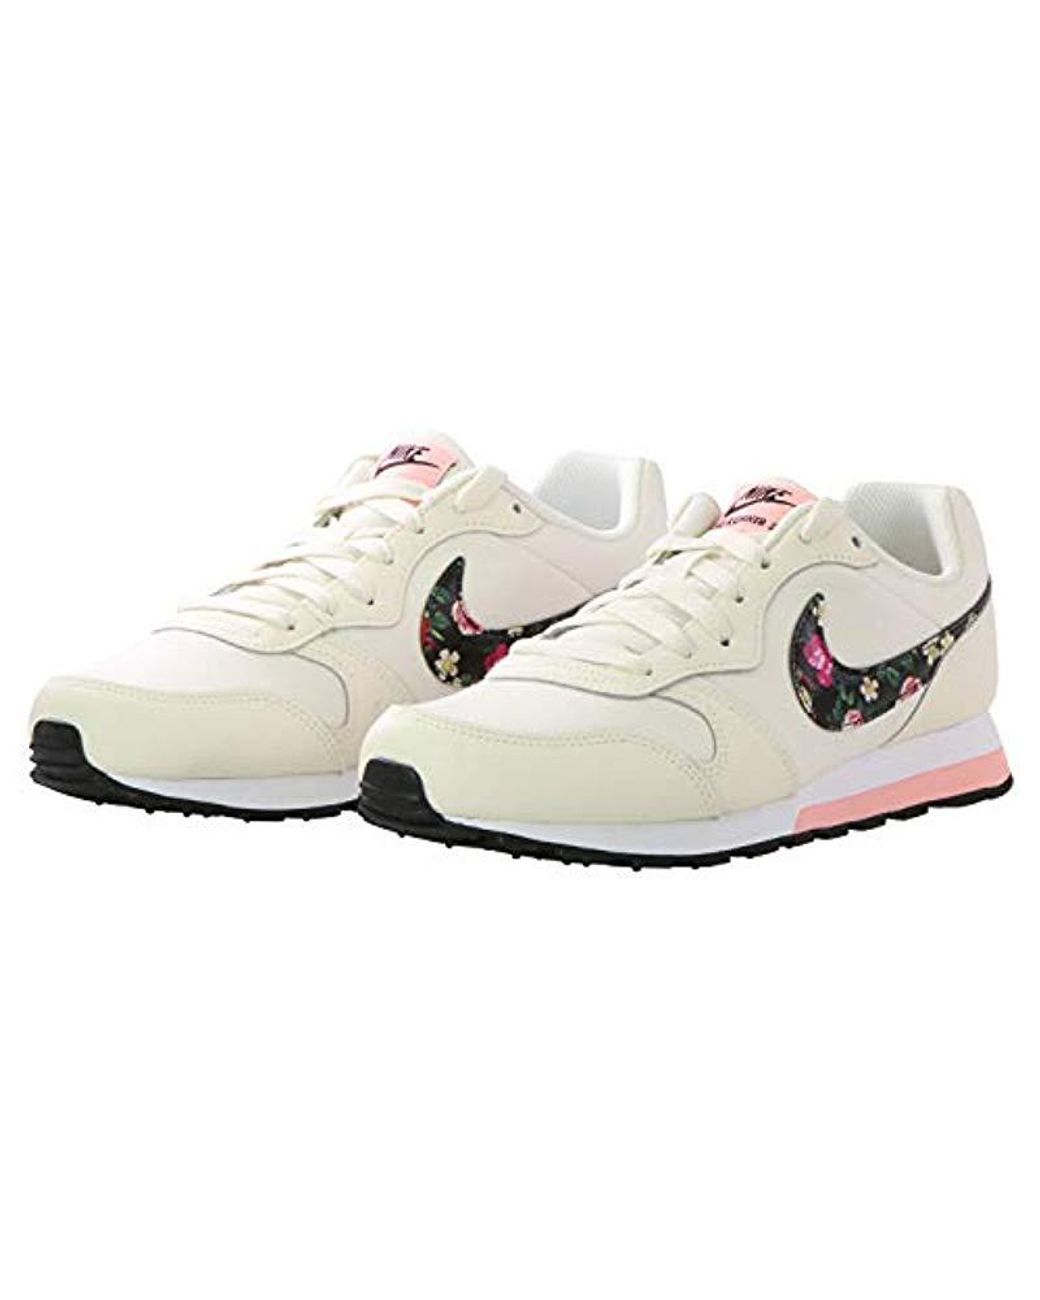 Nike Md Runner 2 Vintage Floral Trail Running Shoes in White | Lyst UK